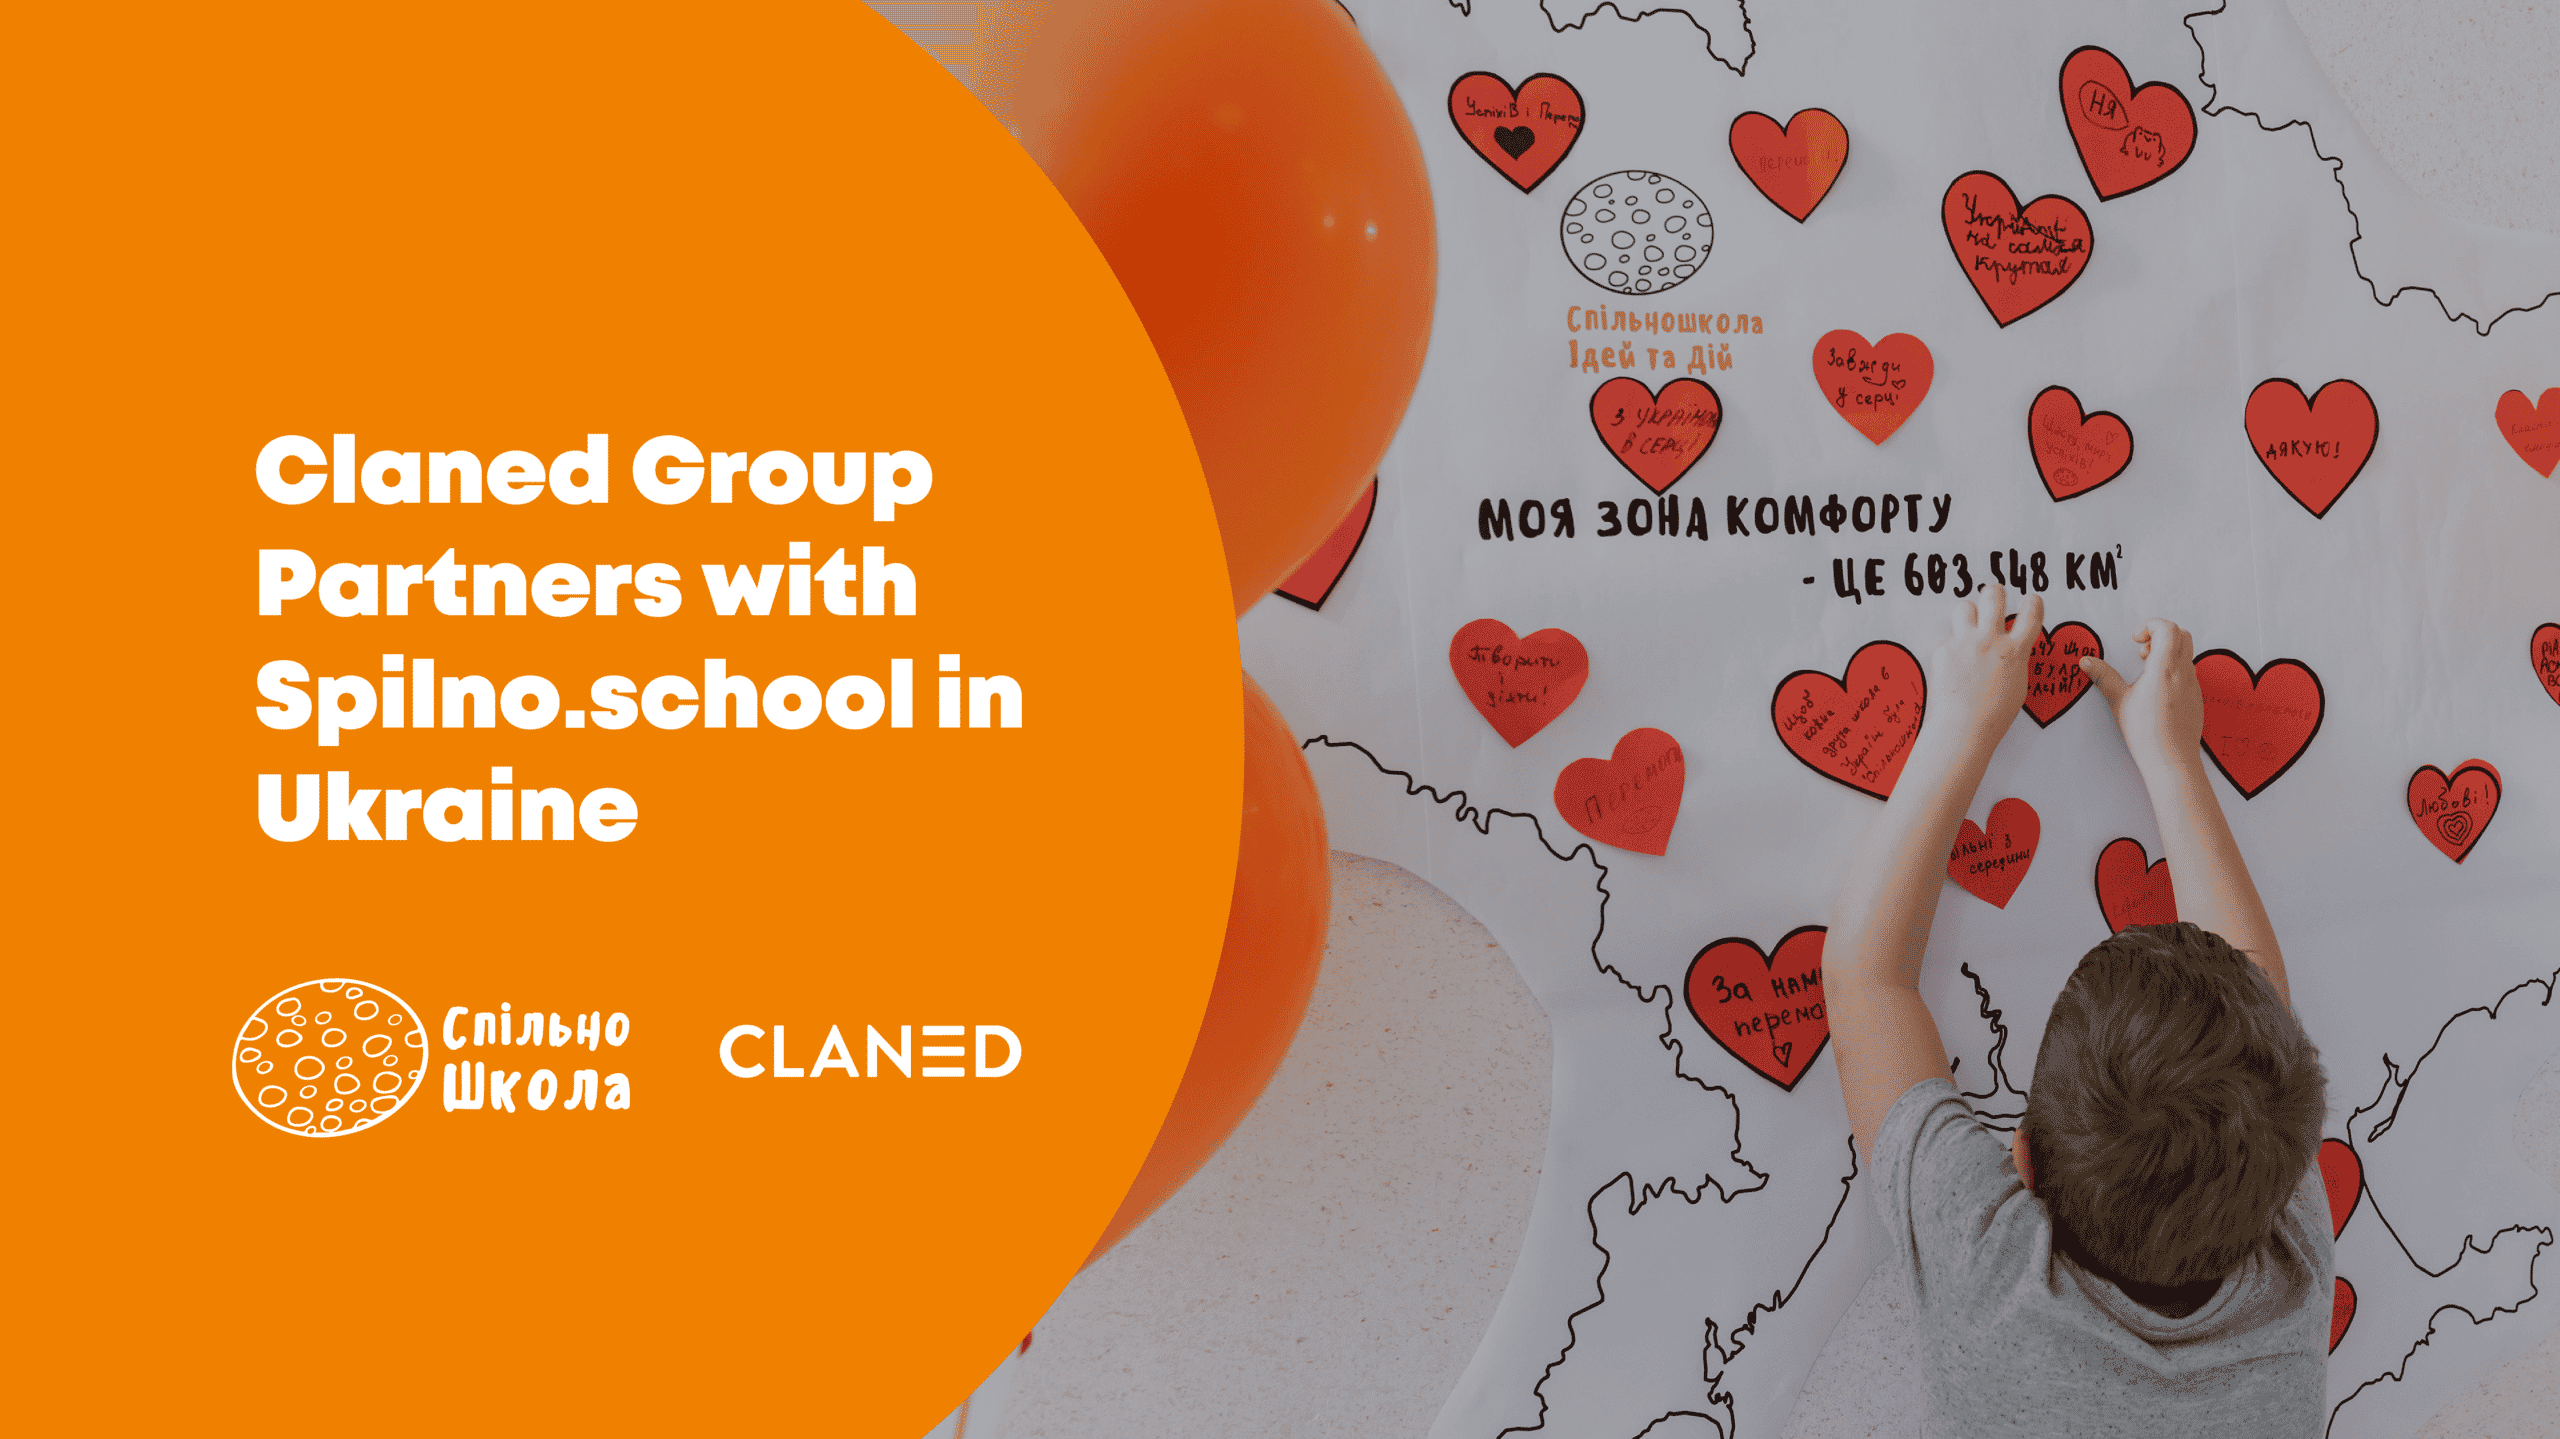 Claned Group Partners with Spilno.school